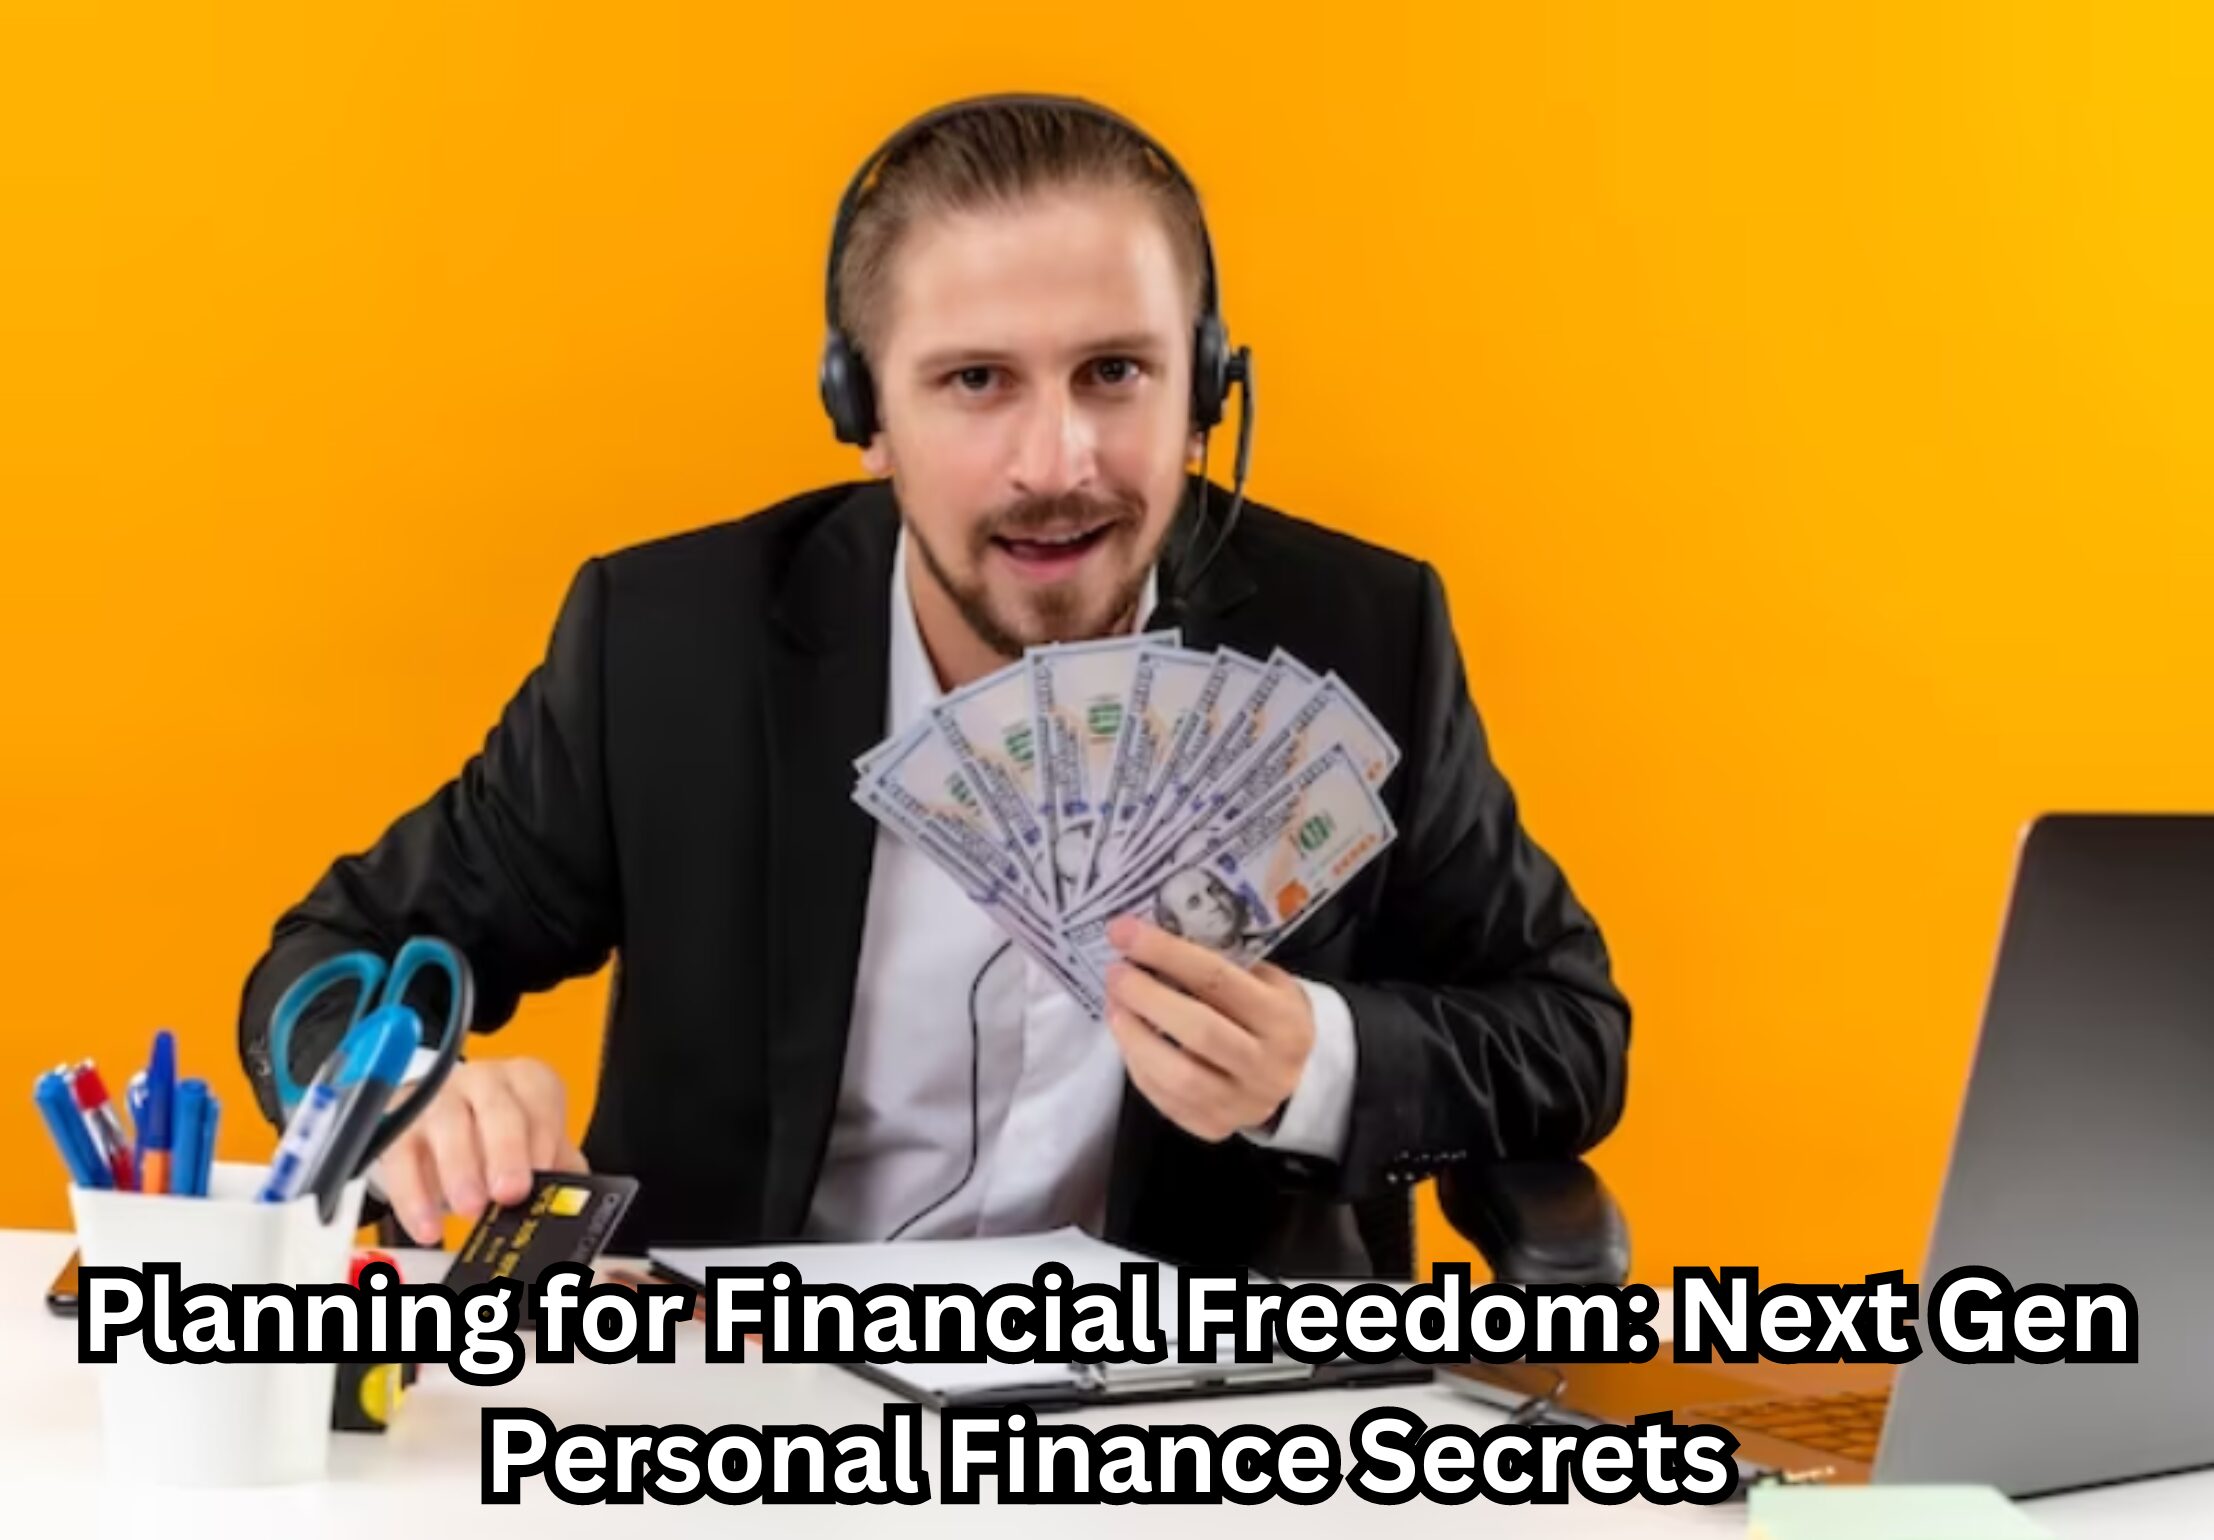 Young professional exploring a digital financial chart, symbolizing the exploration of next-gen personal finance secrets for financial freedom.